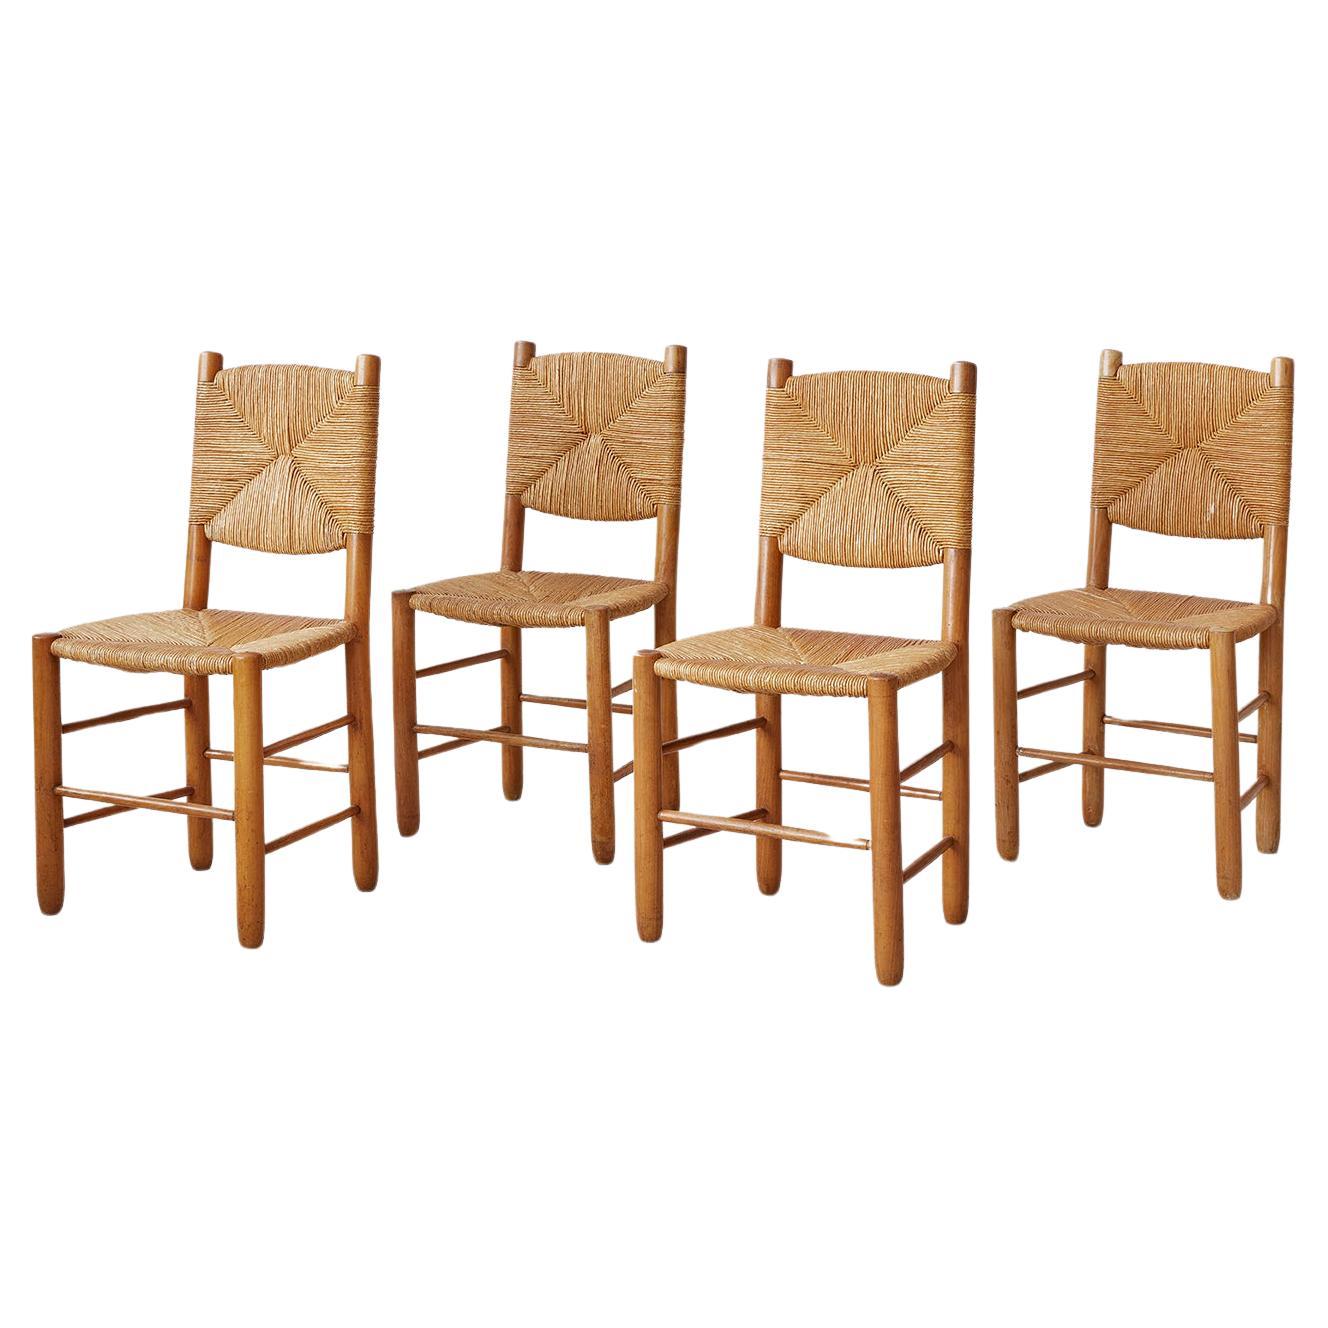 Vintage Set of Four Chairs in Ash and Straw, France, 1950s For Sale